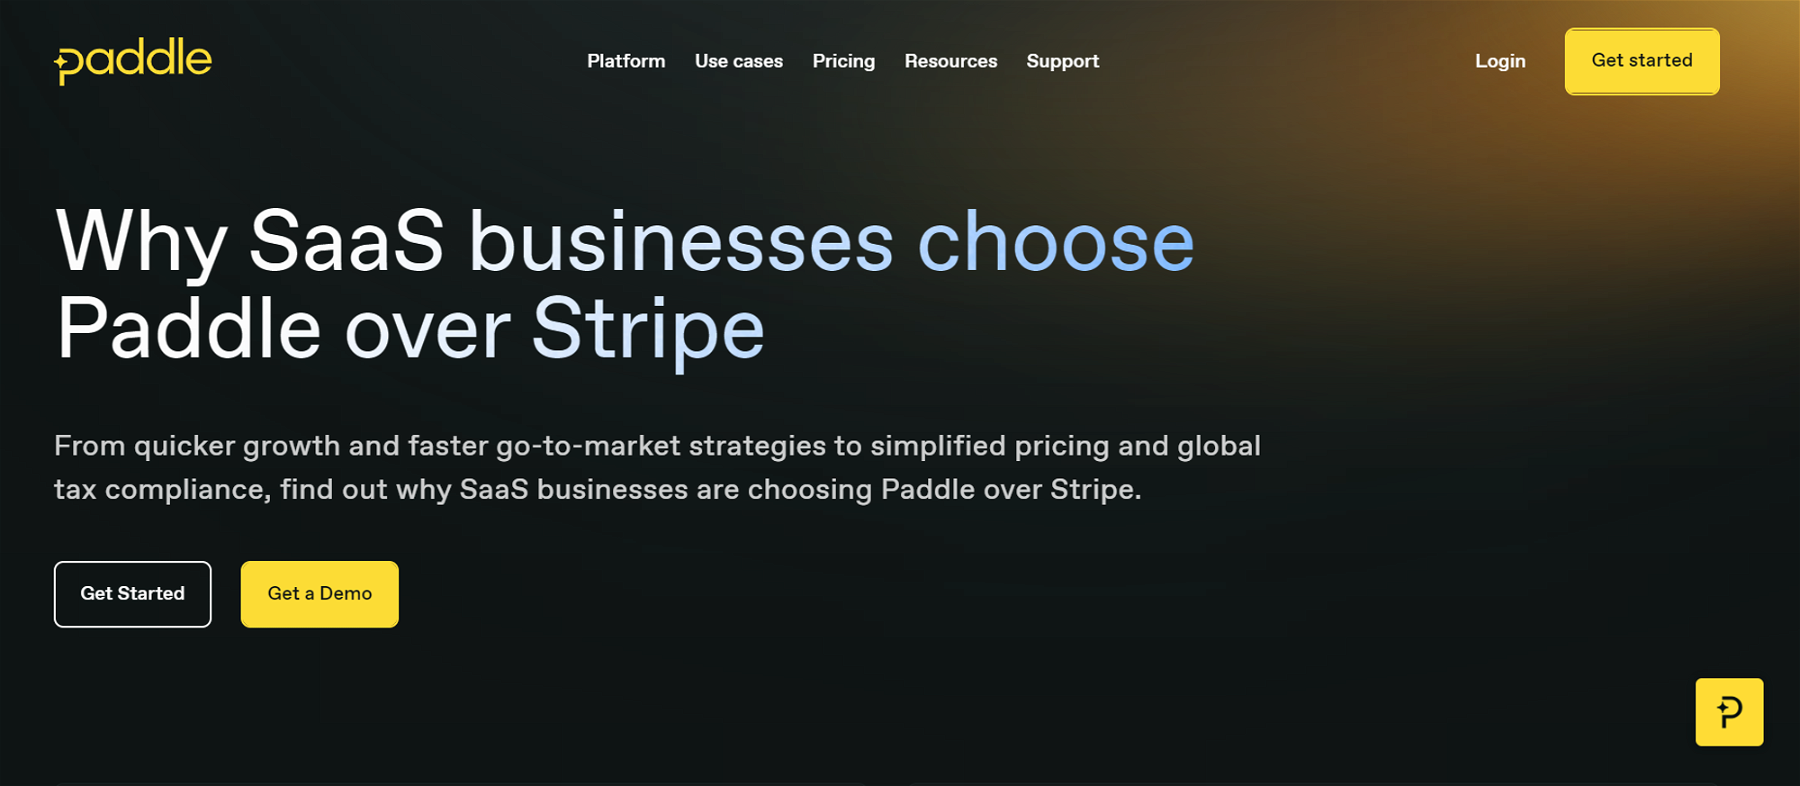 Example of Paddle’s comparison page to Stripe.